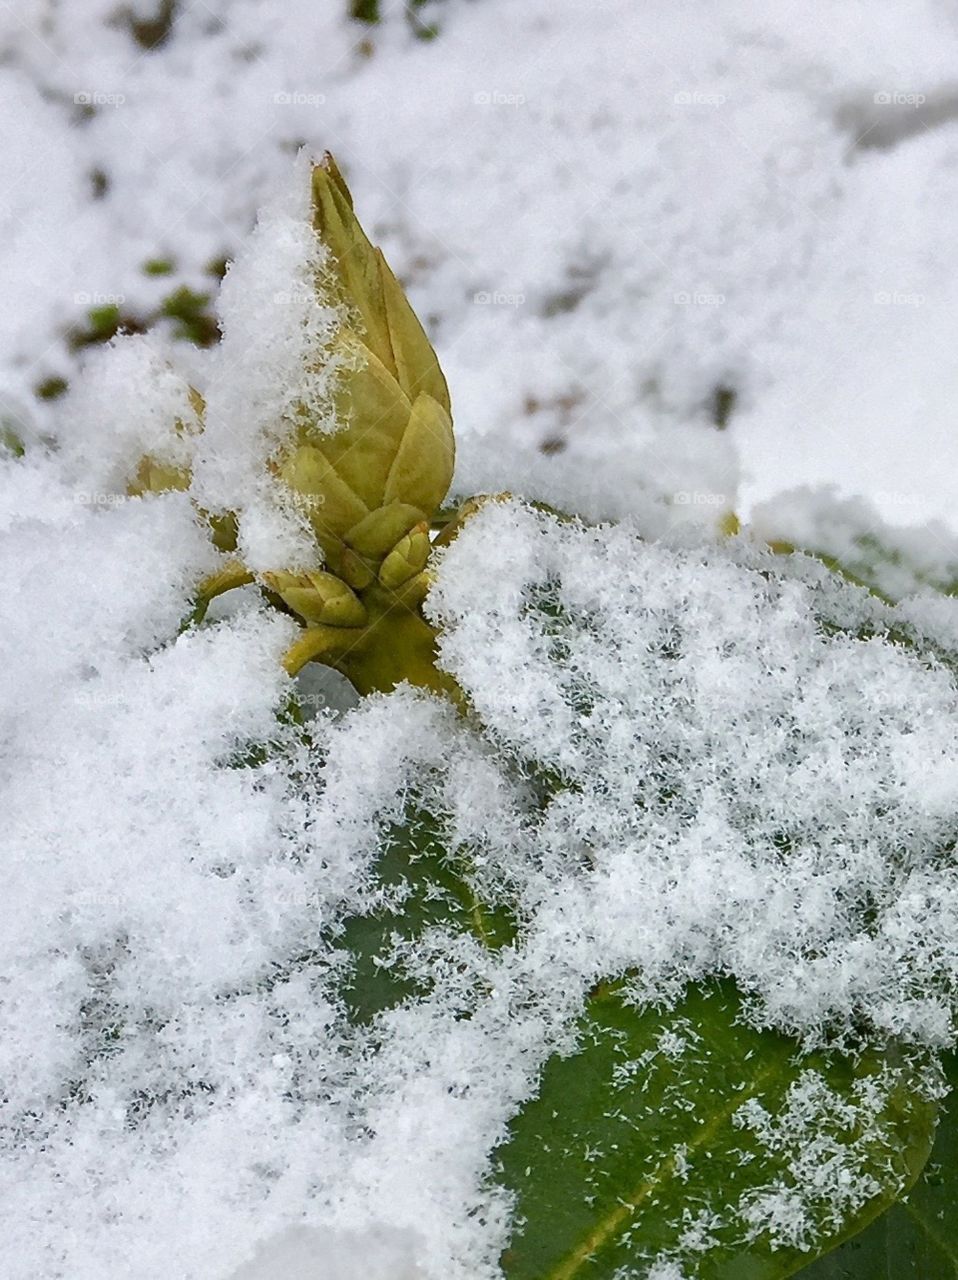 Flower bud on a rhododendron bush that grows in the snow in the flowerbed in Sweden in March.